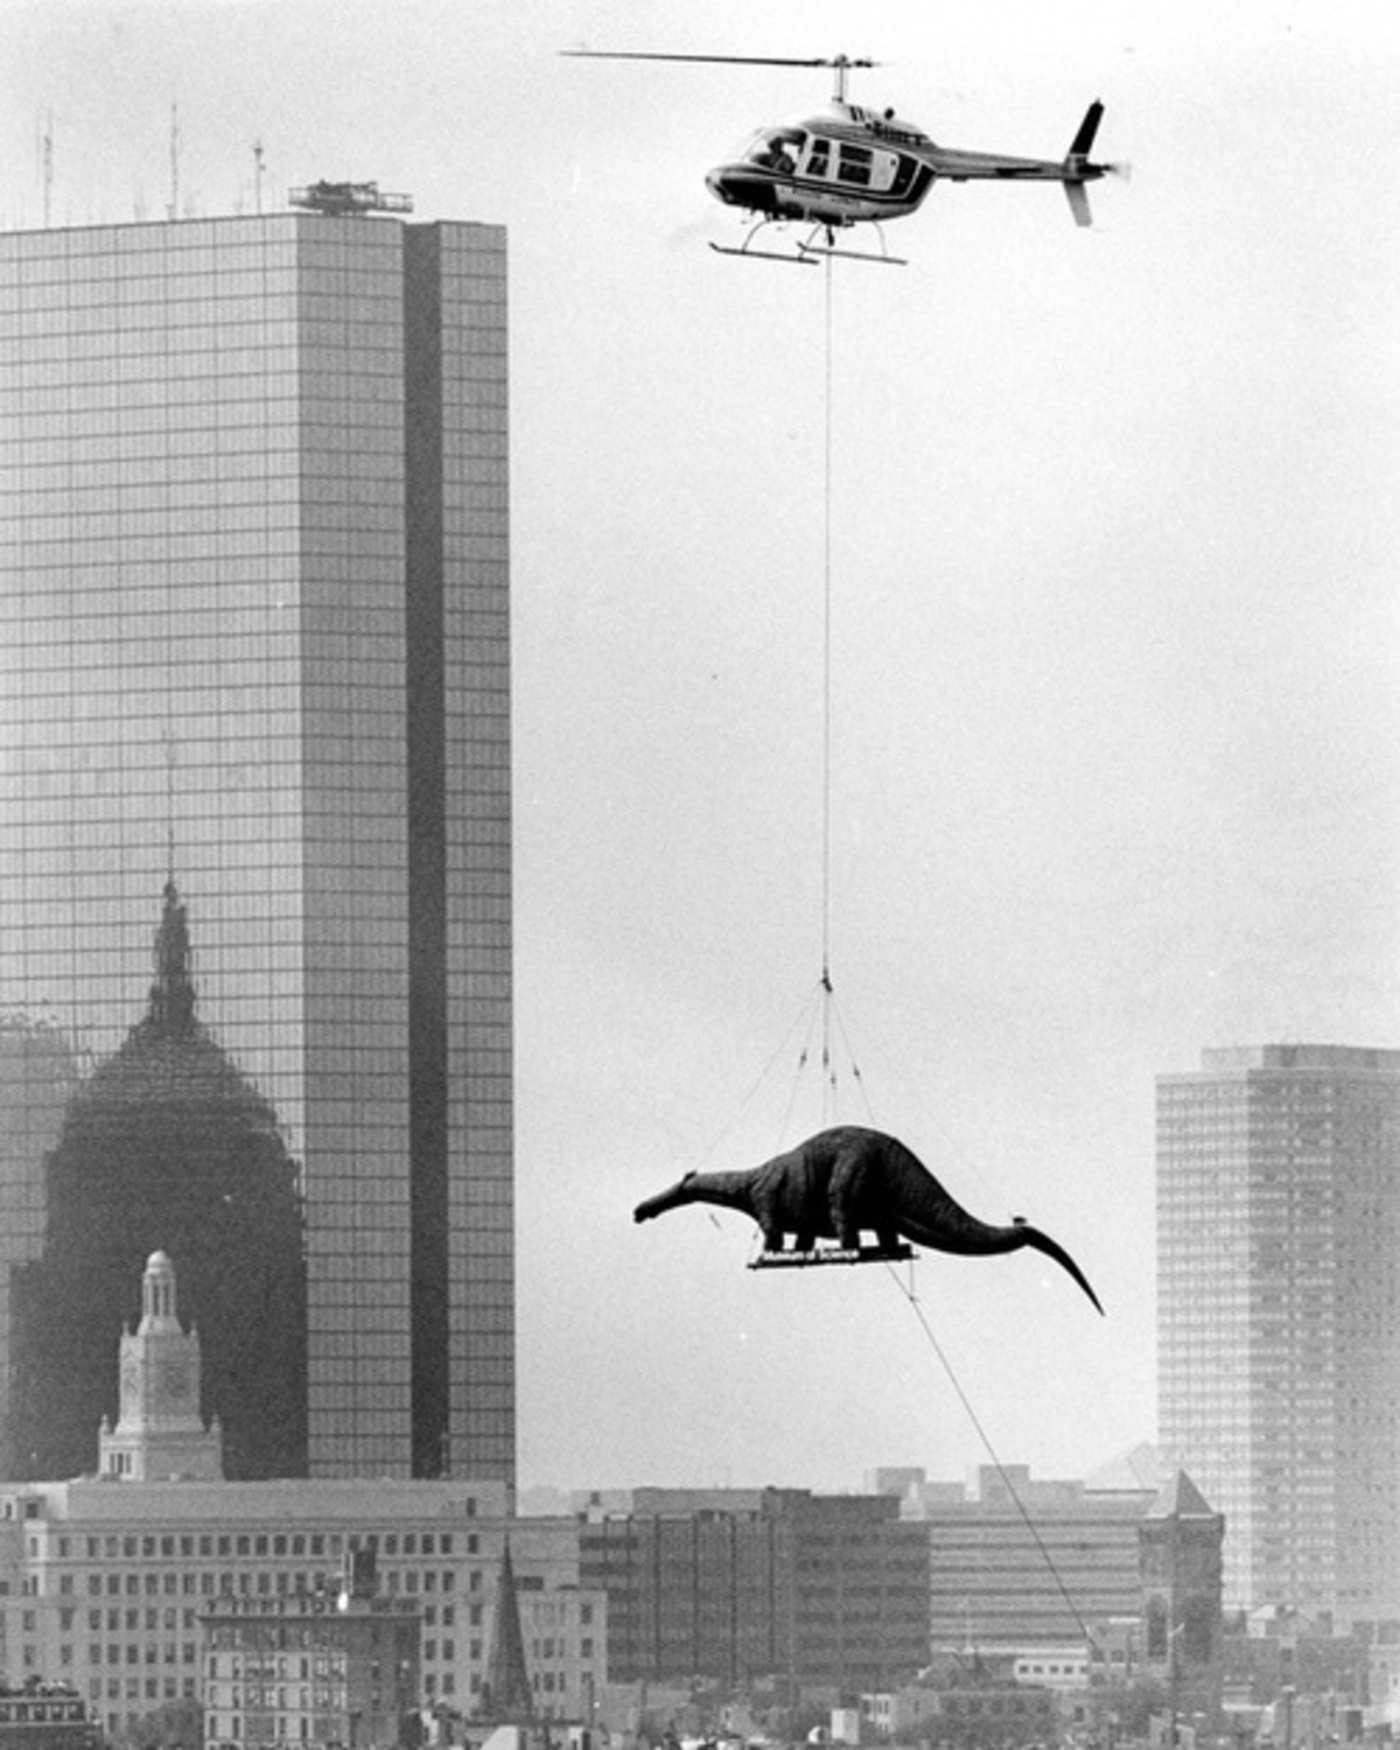 Delivering+a+dinosaur+to+the+Boston+Museum+of+Science%2C+circa+1985.